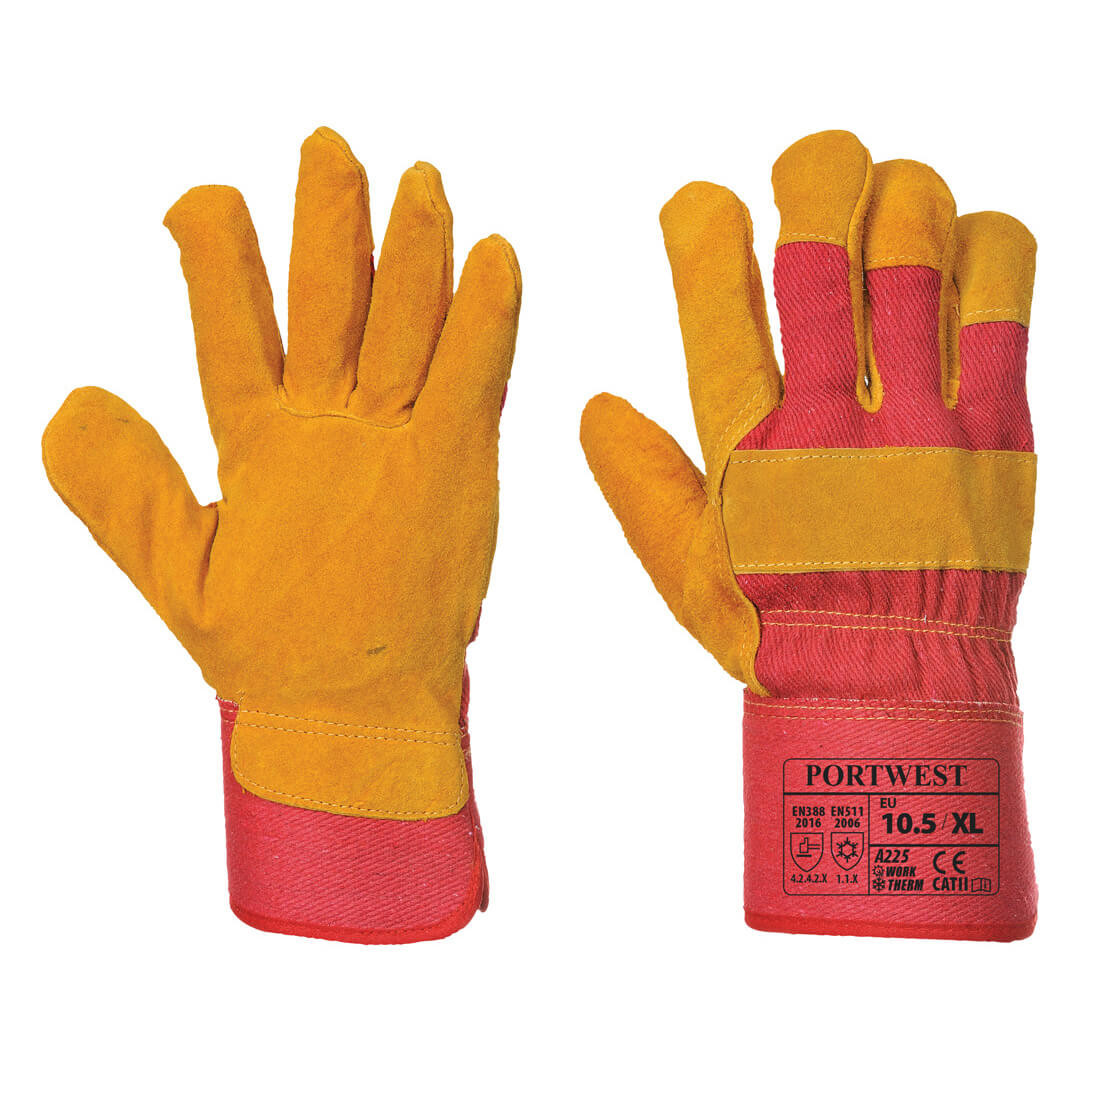 Fleece Lined Rigger - Personal protection